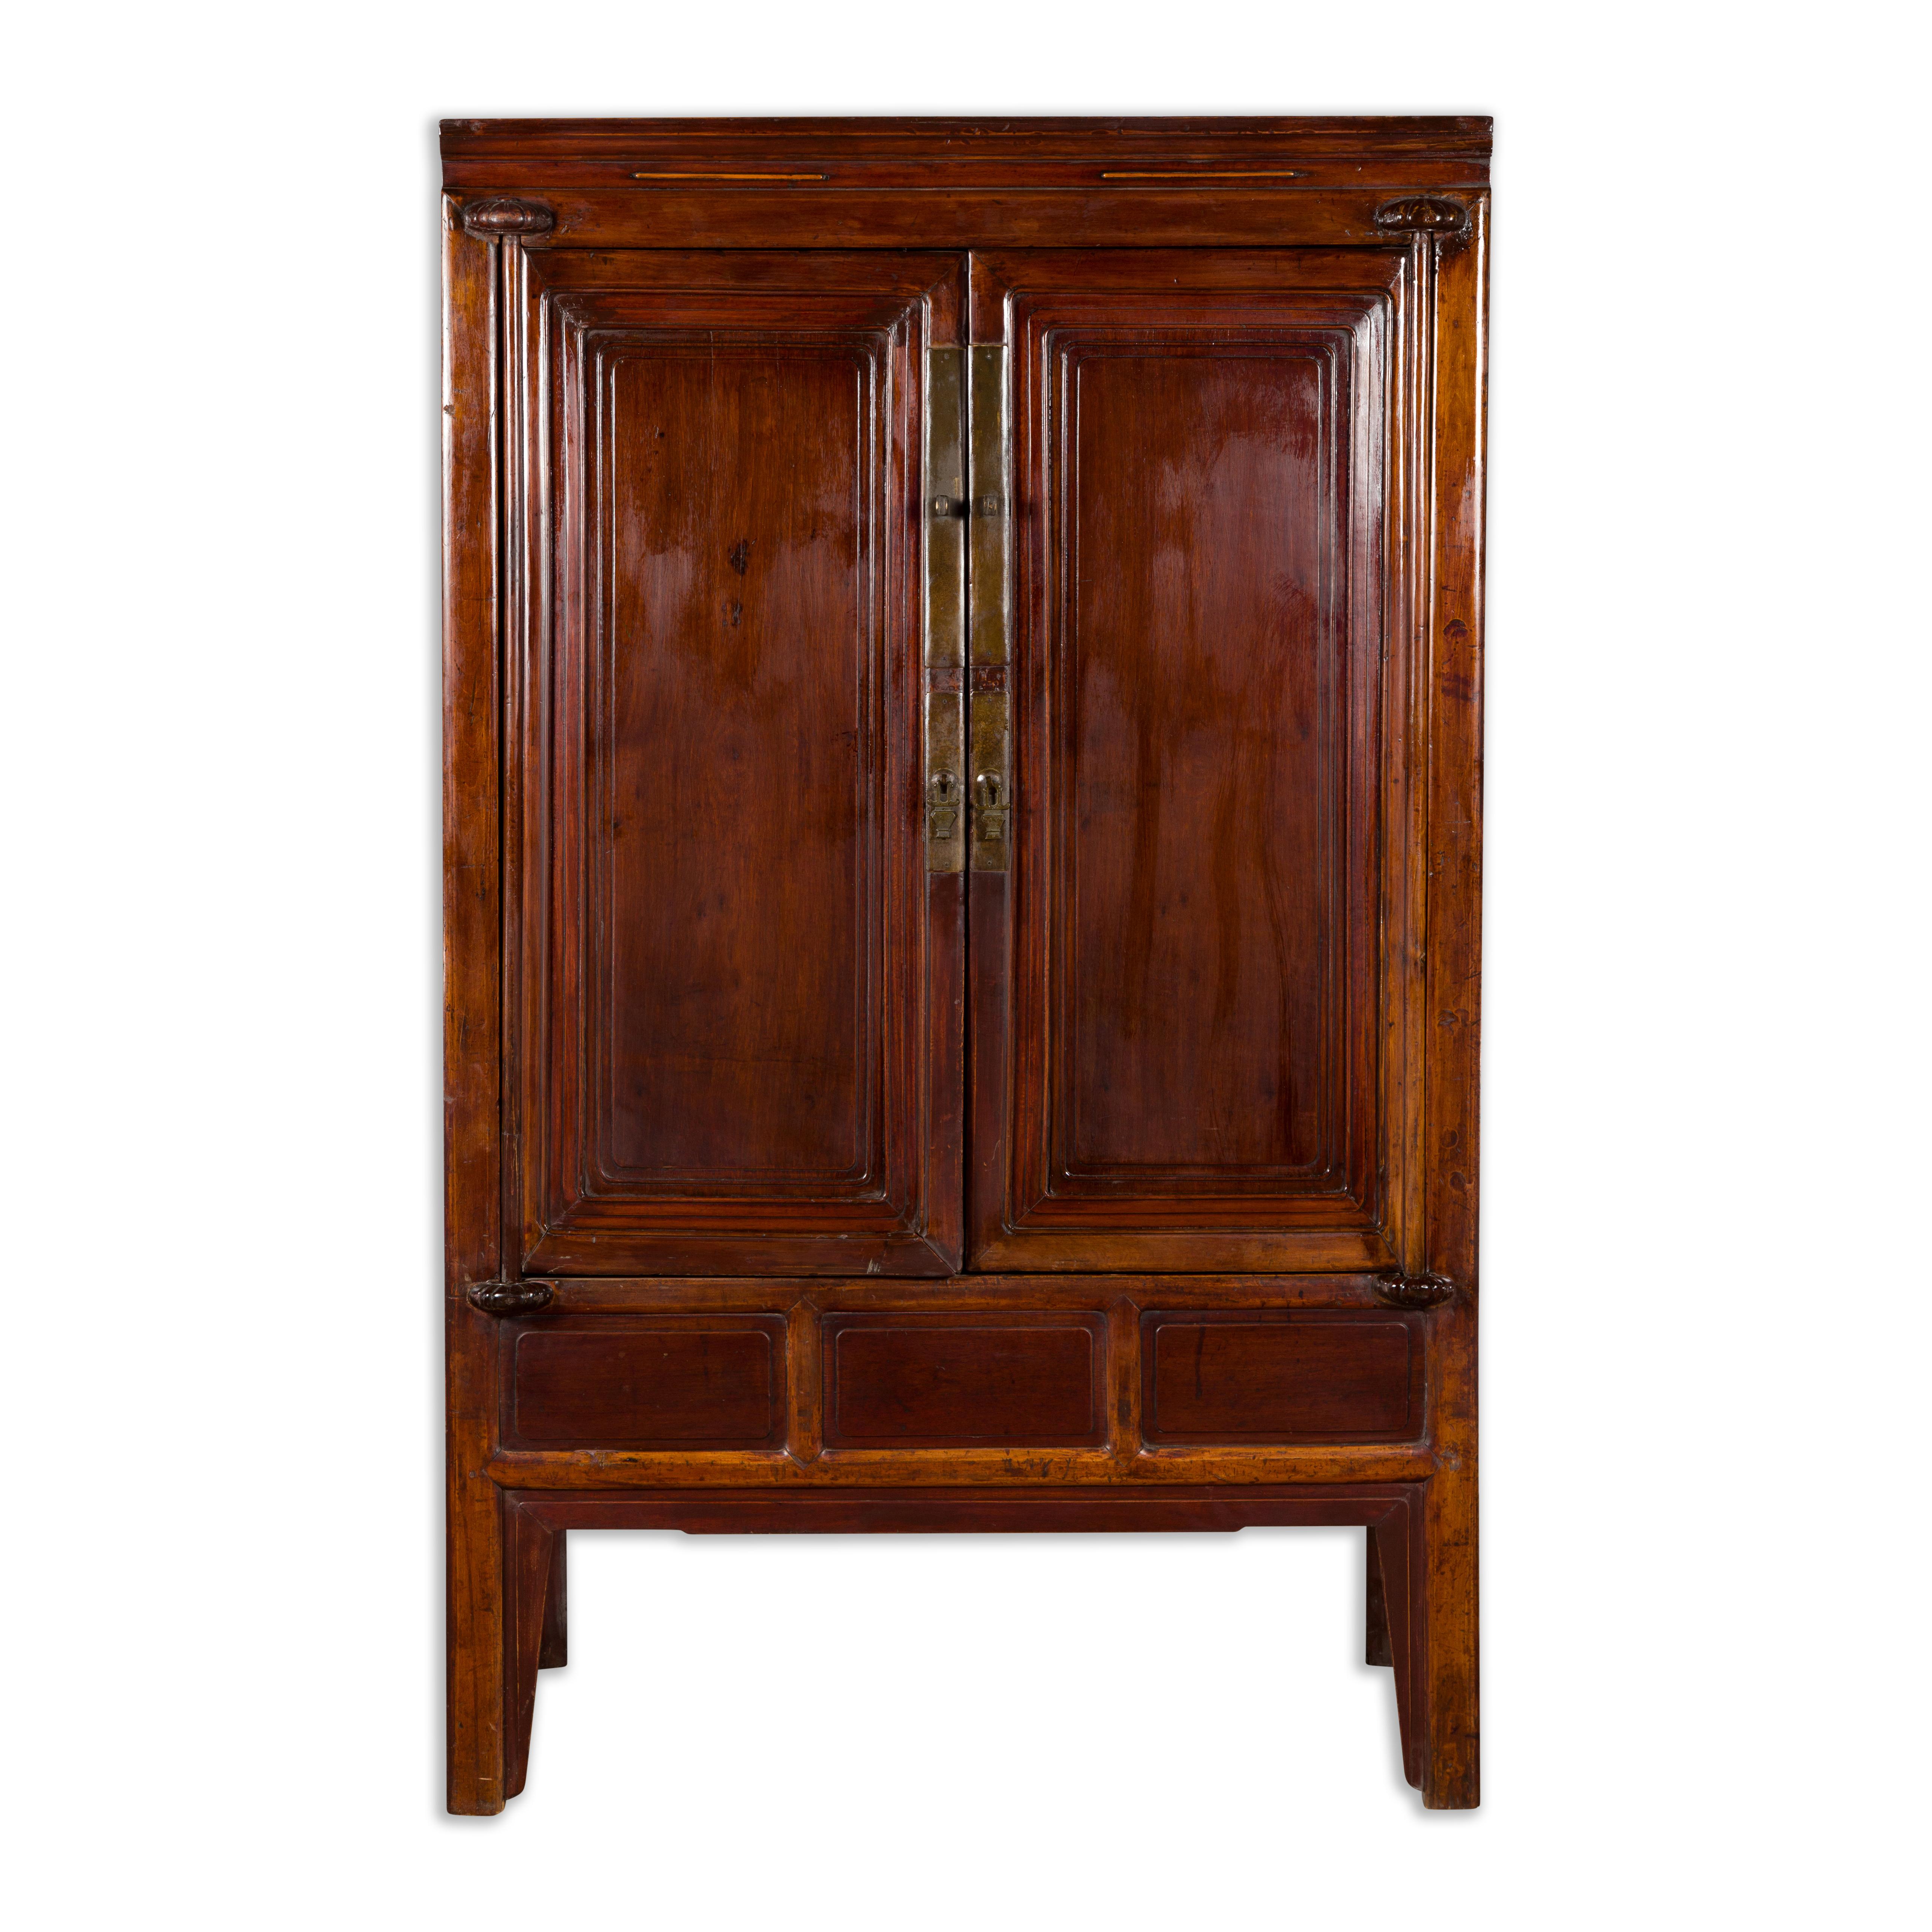 Chinese Qing Dynasty 19th Century Ningbo Cypress Cabinet with Brass Hardware For Sale 4